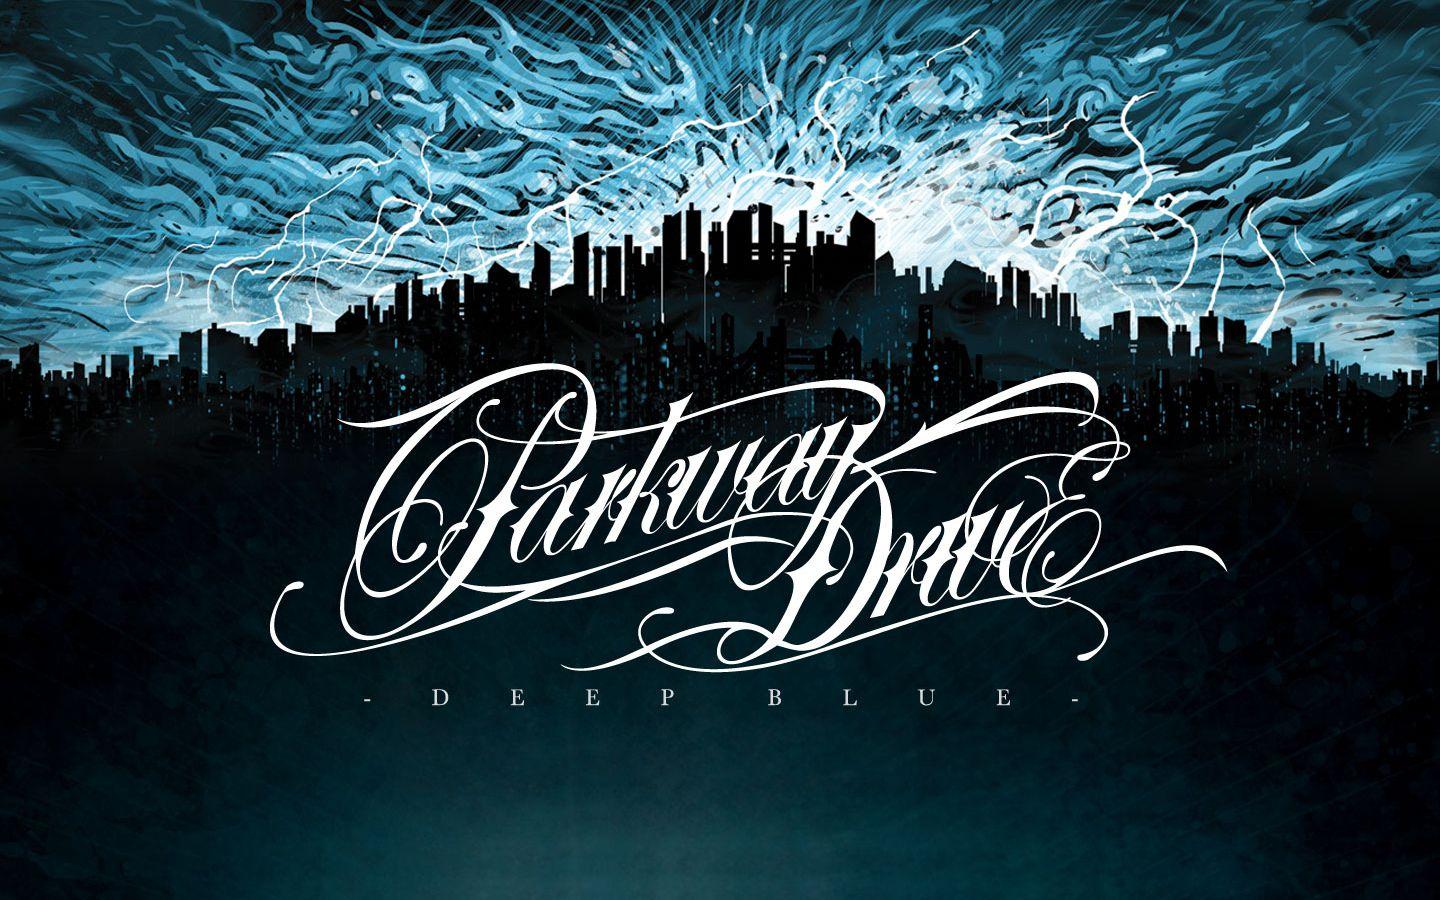 Parkway Drive image deep blue HD wallpaper and background photo